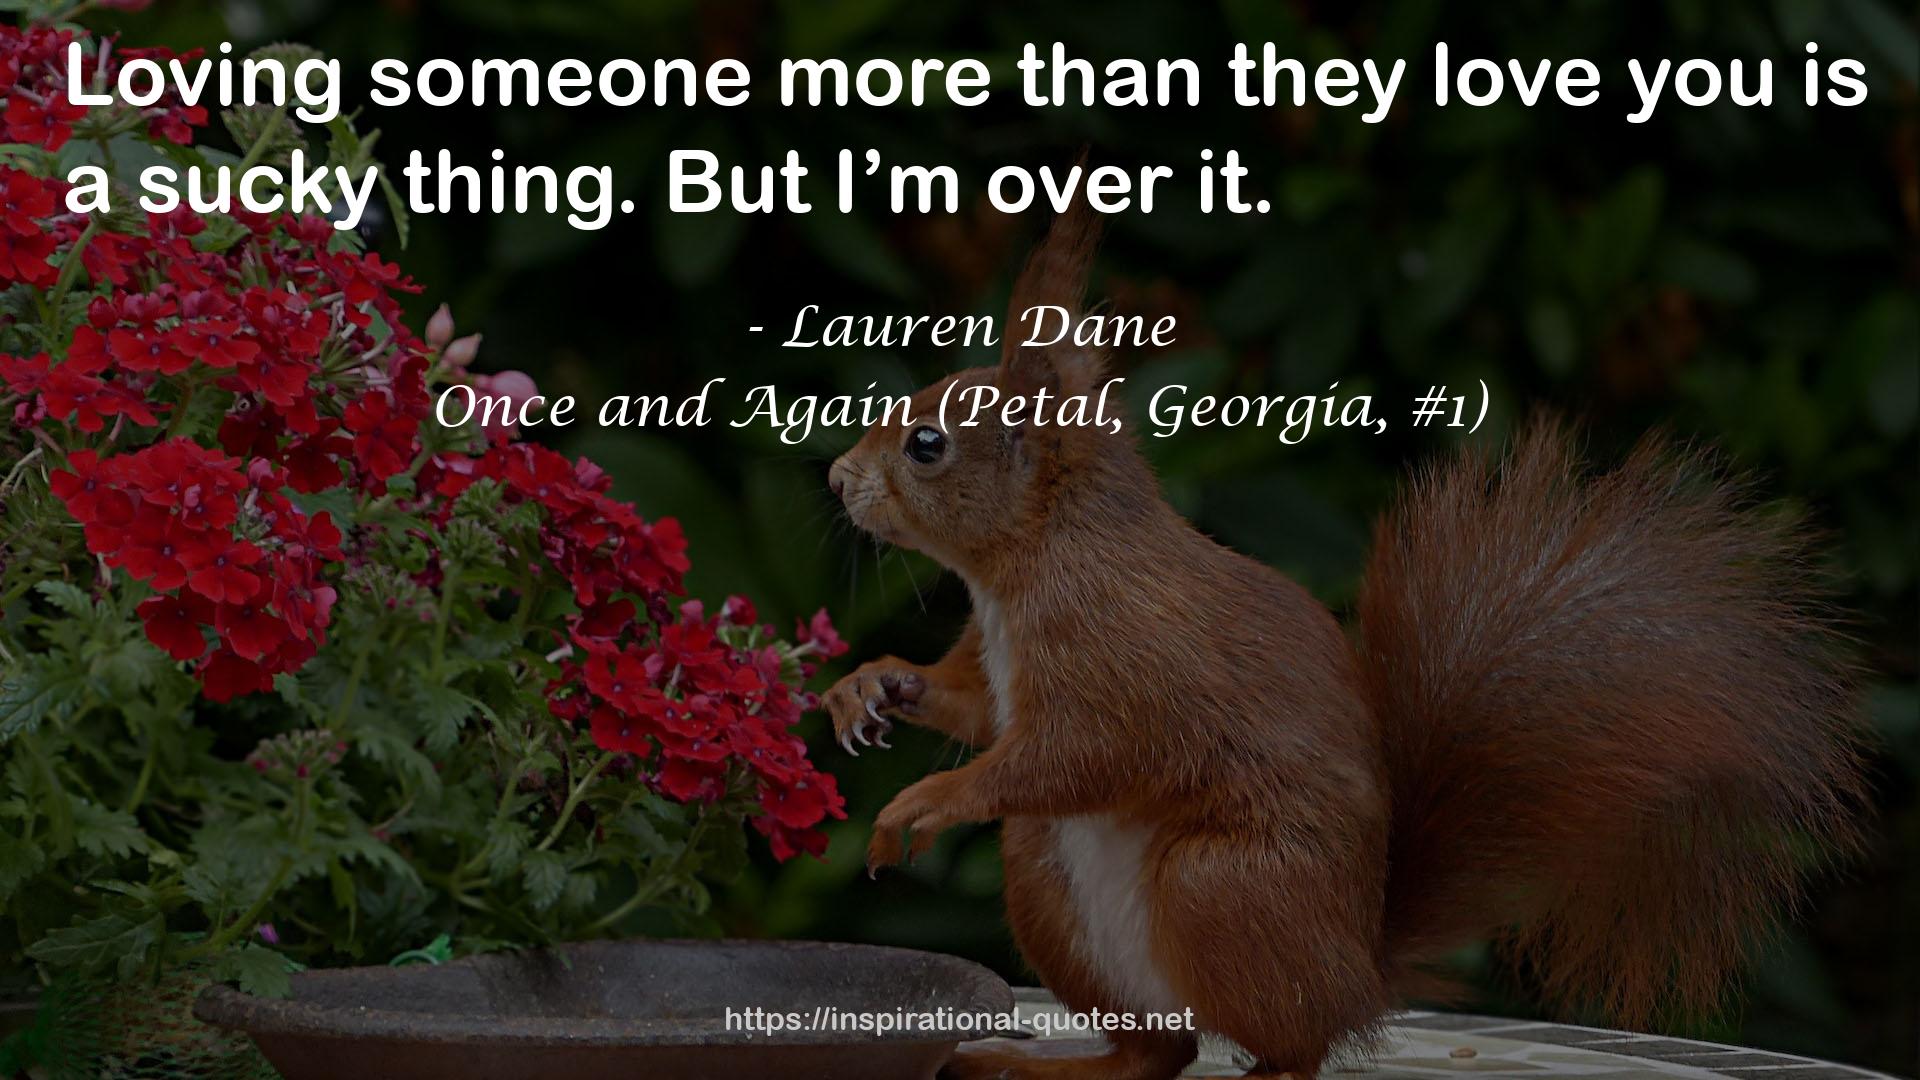 Once and Again (Petal, Georgia, #1) QUOTES